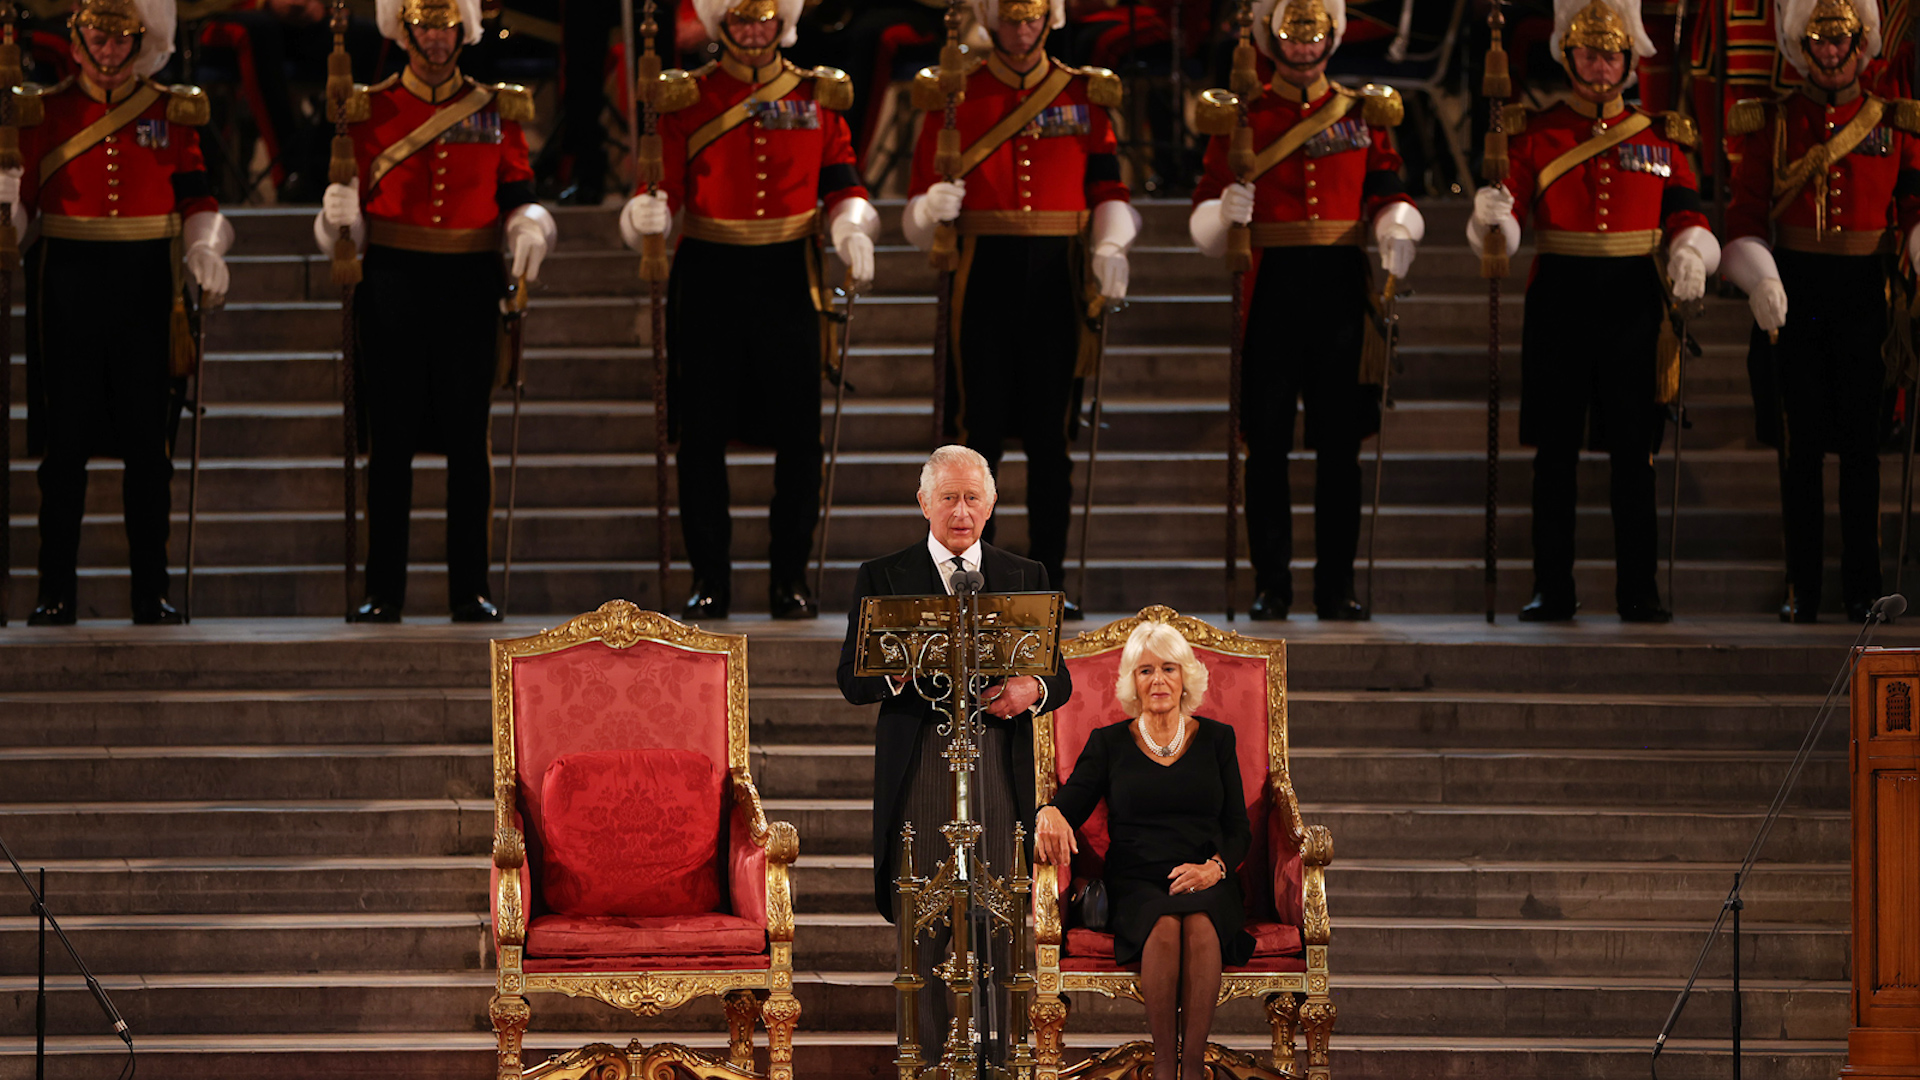 King Charles III addresses parliament, promises to emulate queen's example  - The Washington Post